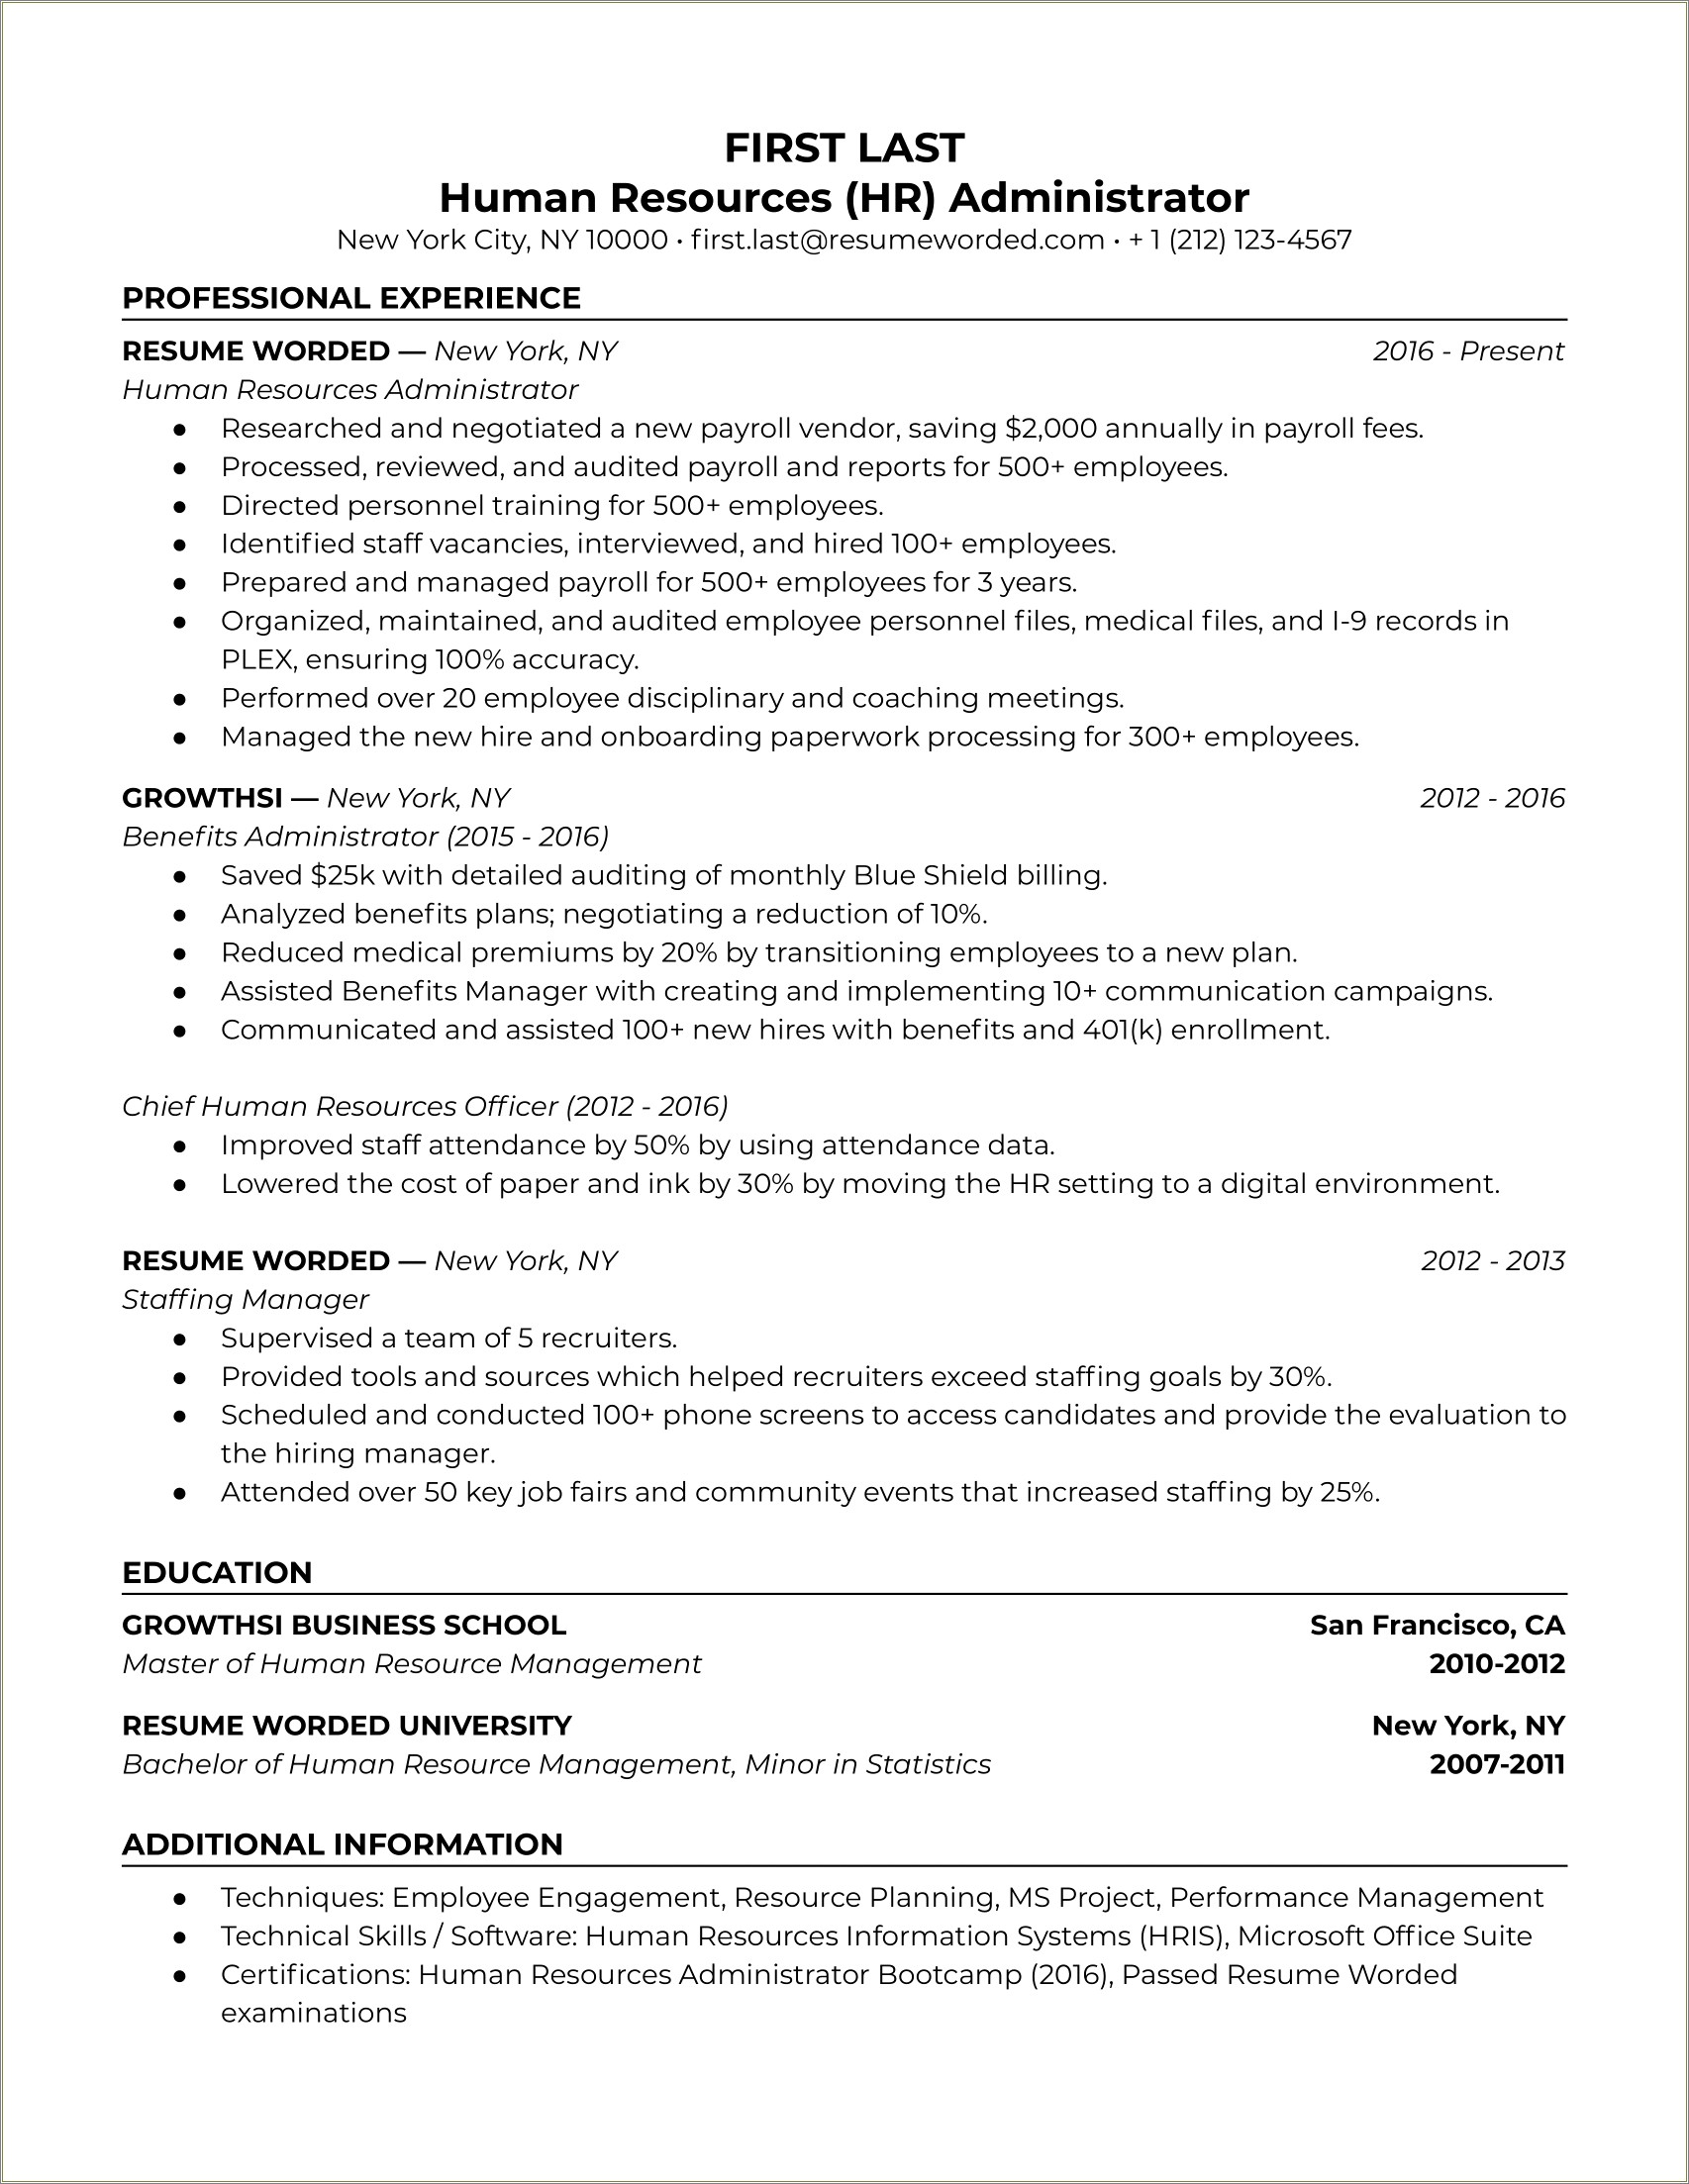 Sample Resume For Chief Administrative Officer